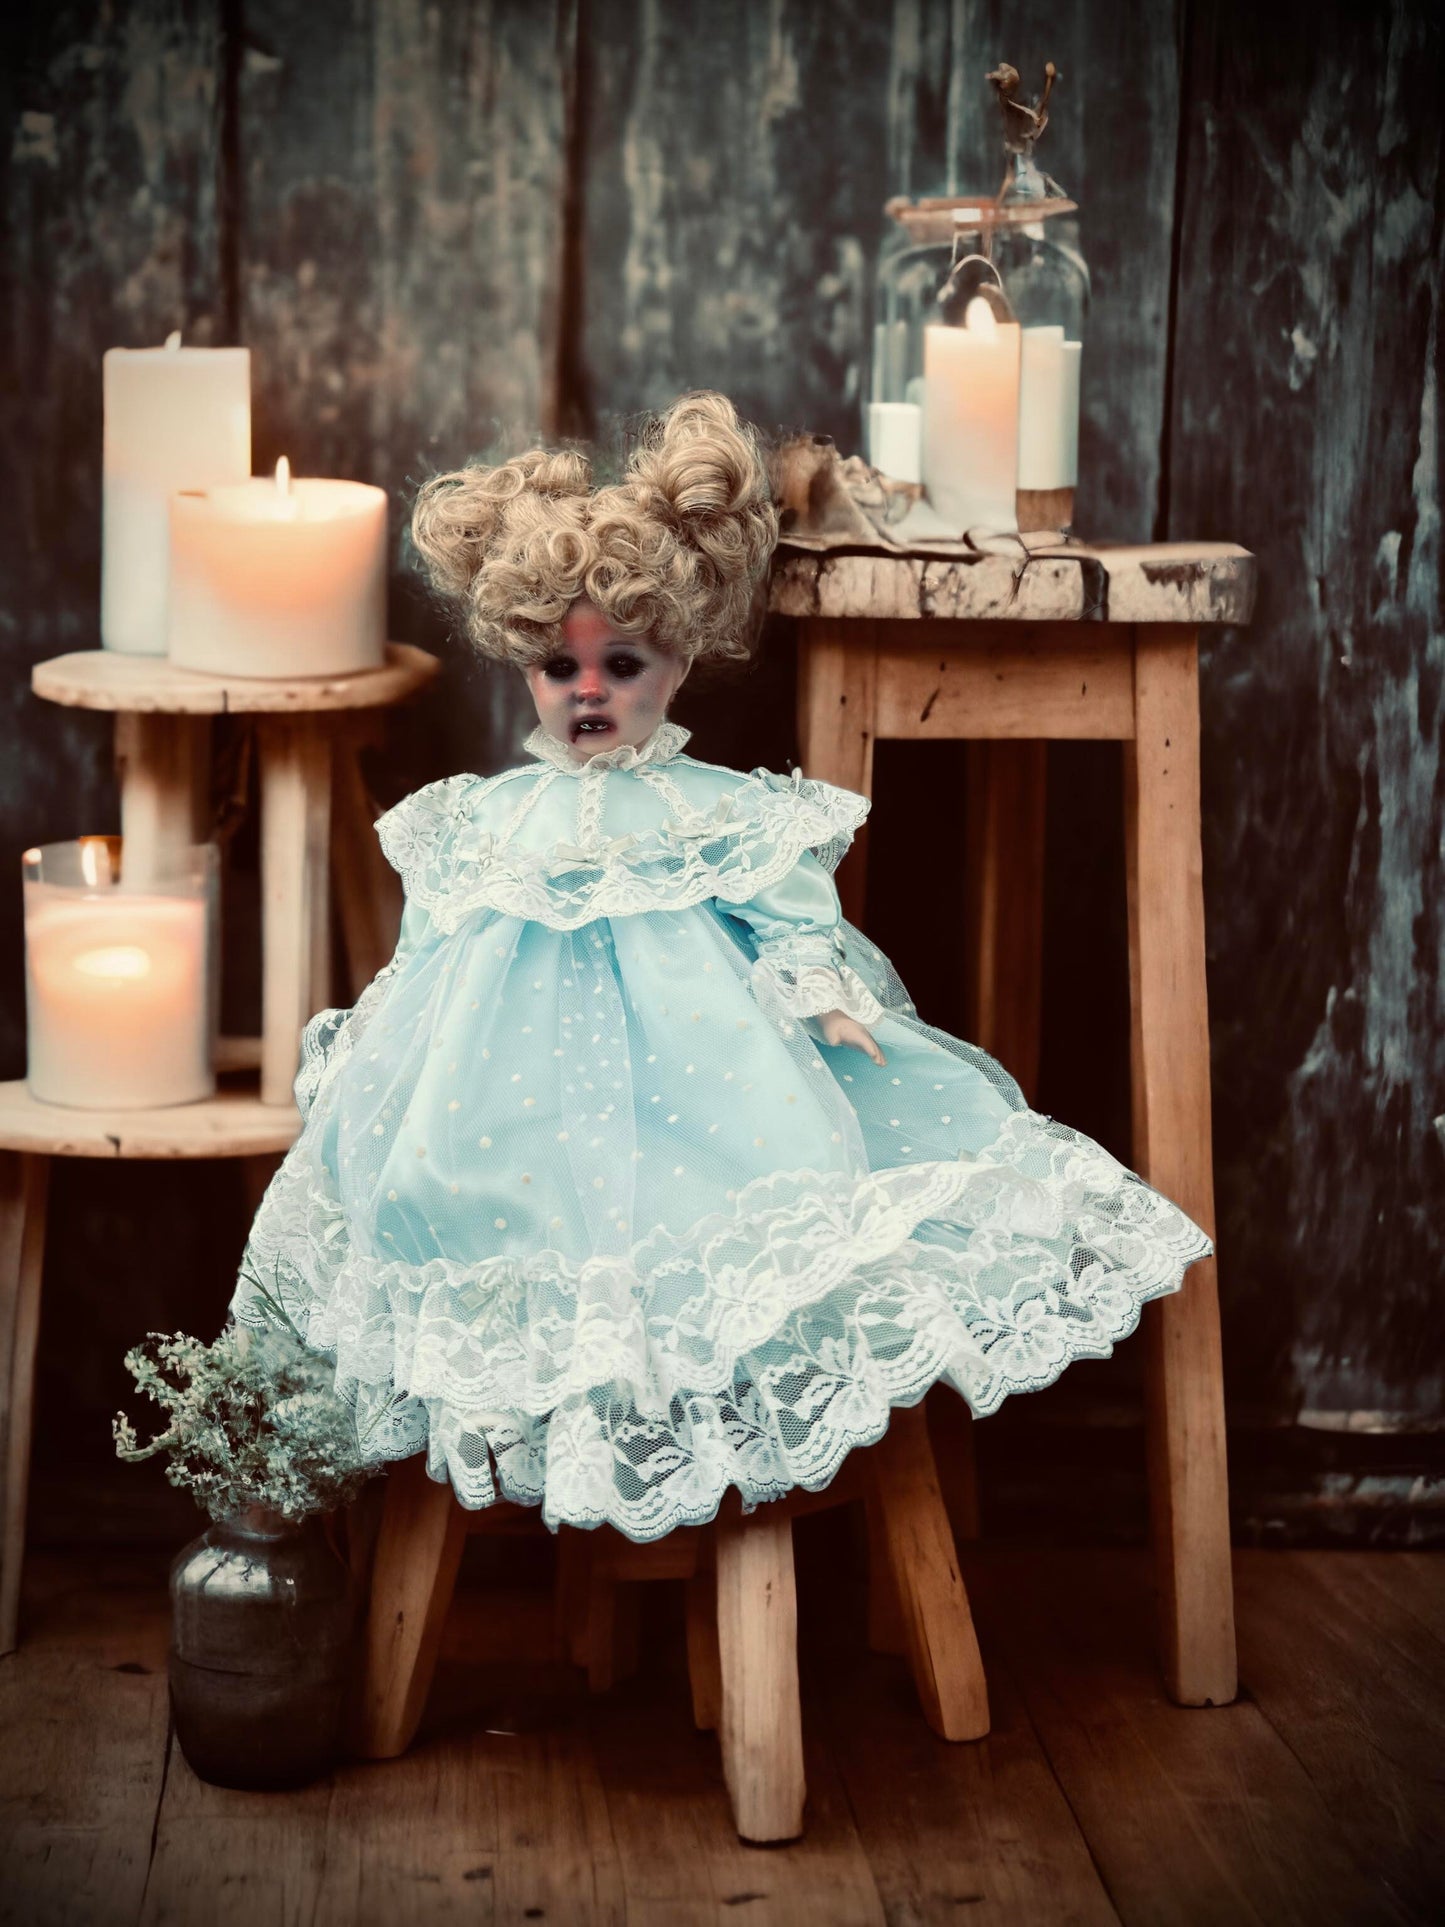 Meet Jannette 19" Doll Porcelain Witchy Creepy Haunted Spirit Infected Scary Spooky Zombie Possessed Fall Gothic Positive Energy